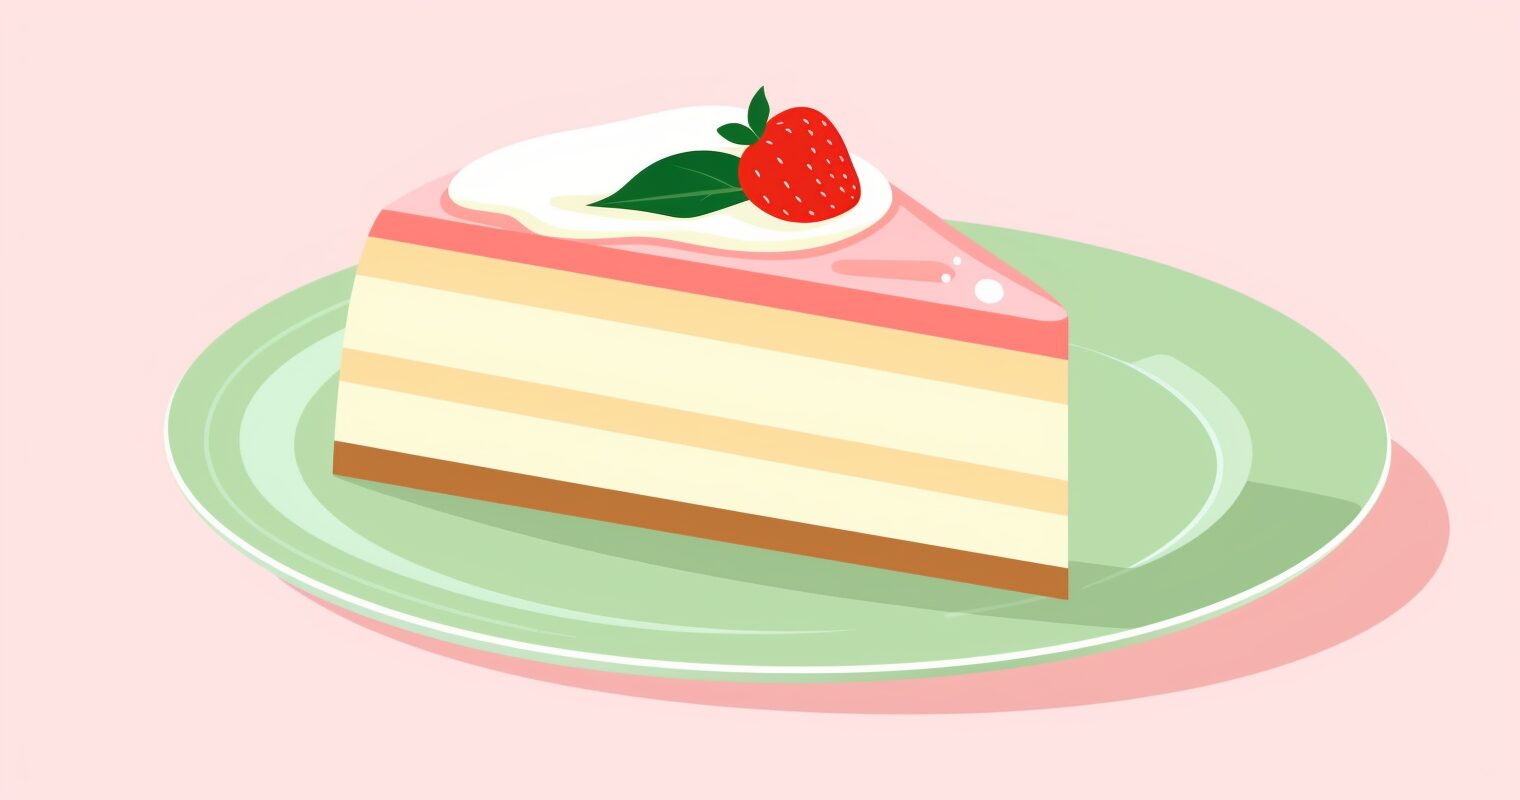 A slice of cake on a plate topped with a strawberry and pink icing.